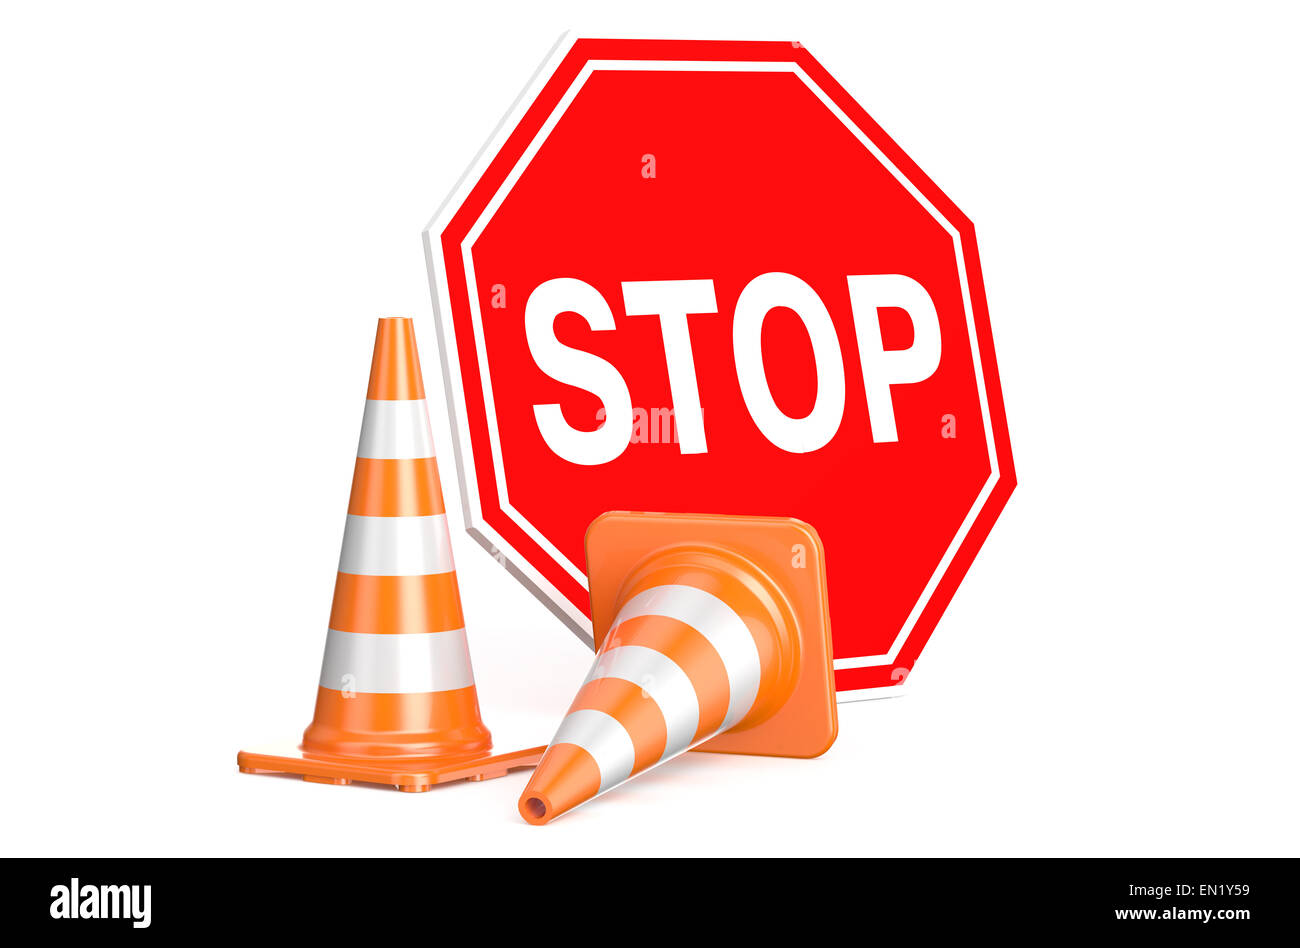 Traffic cones and sign stop isolated on white background Stock Photo